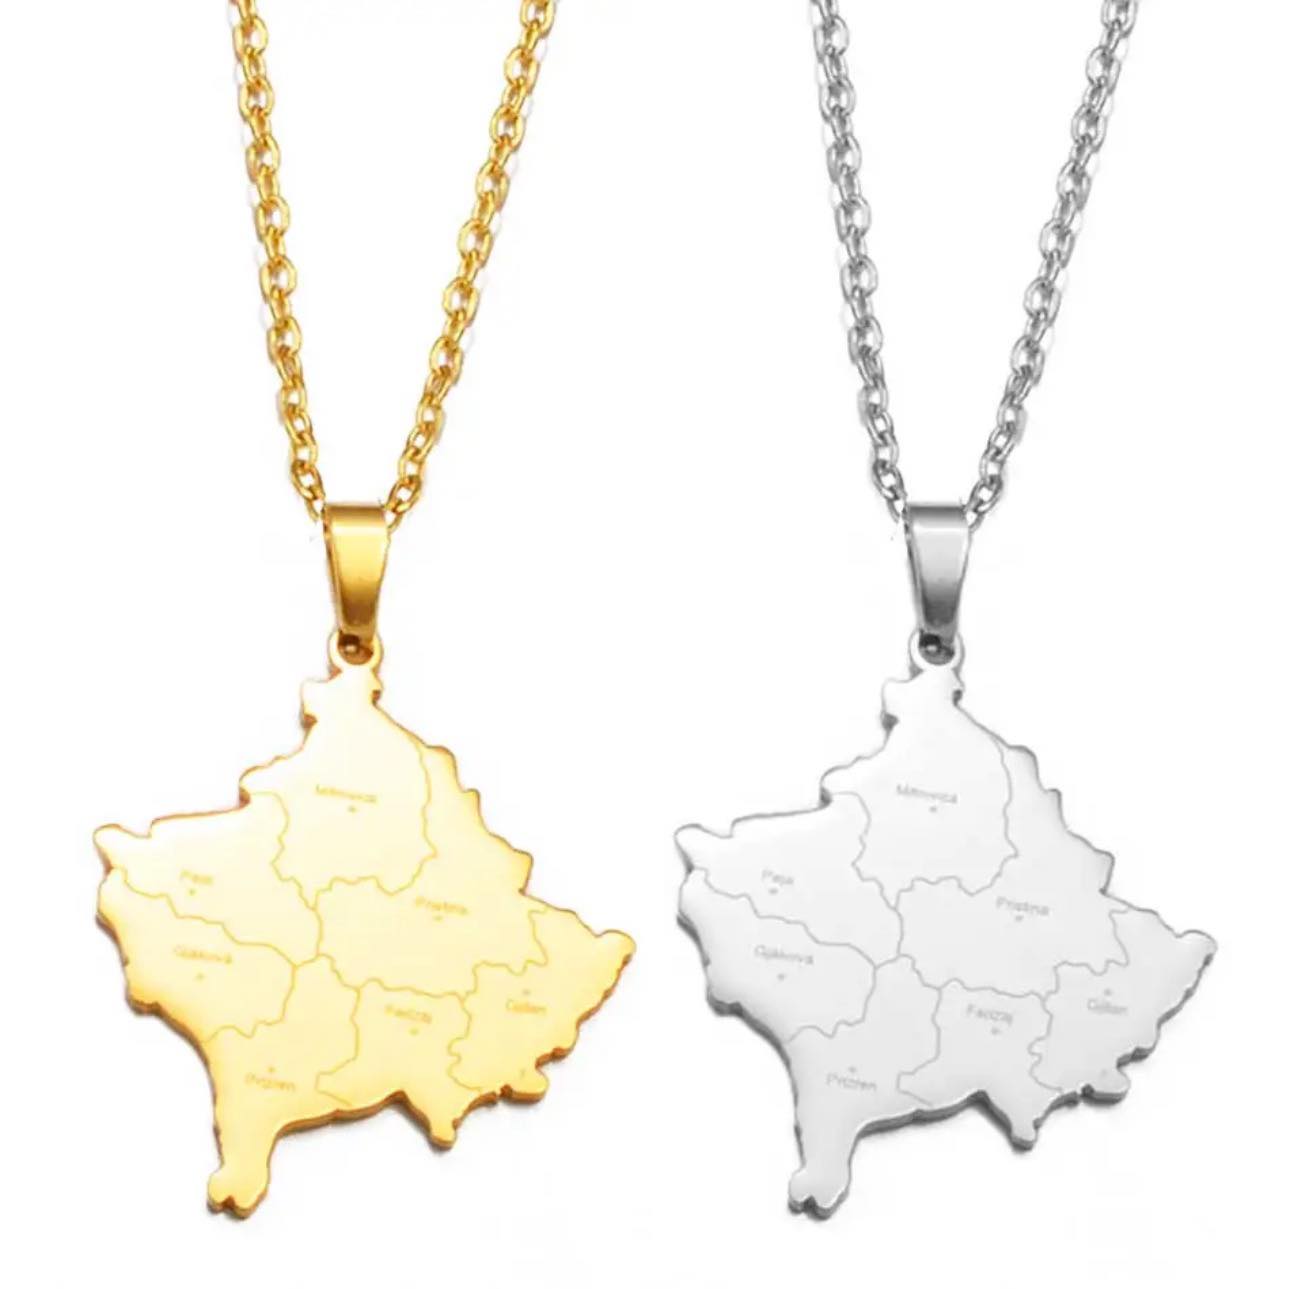 Kosovo Map & Cities Necklace